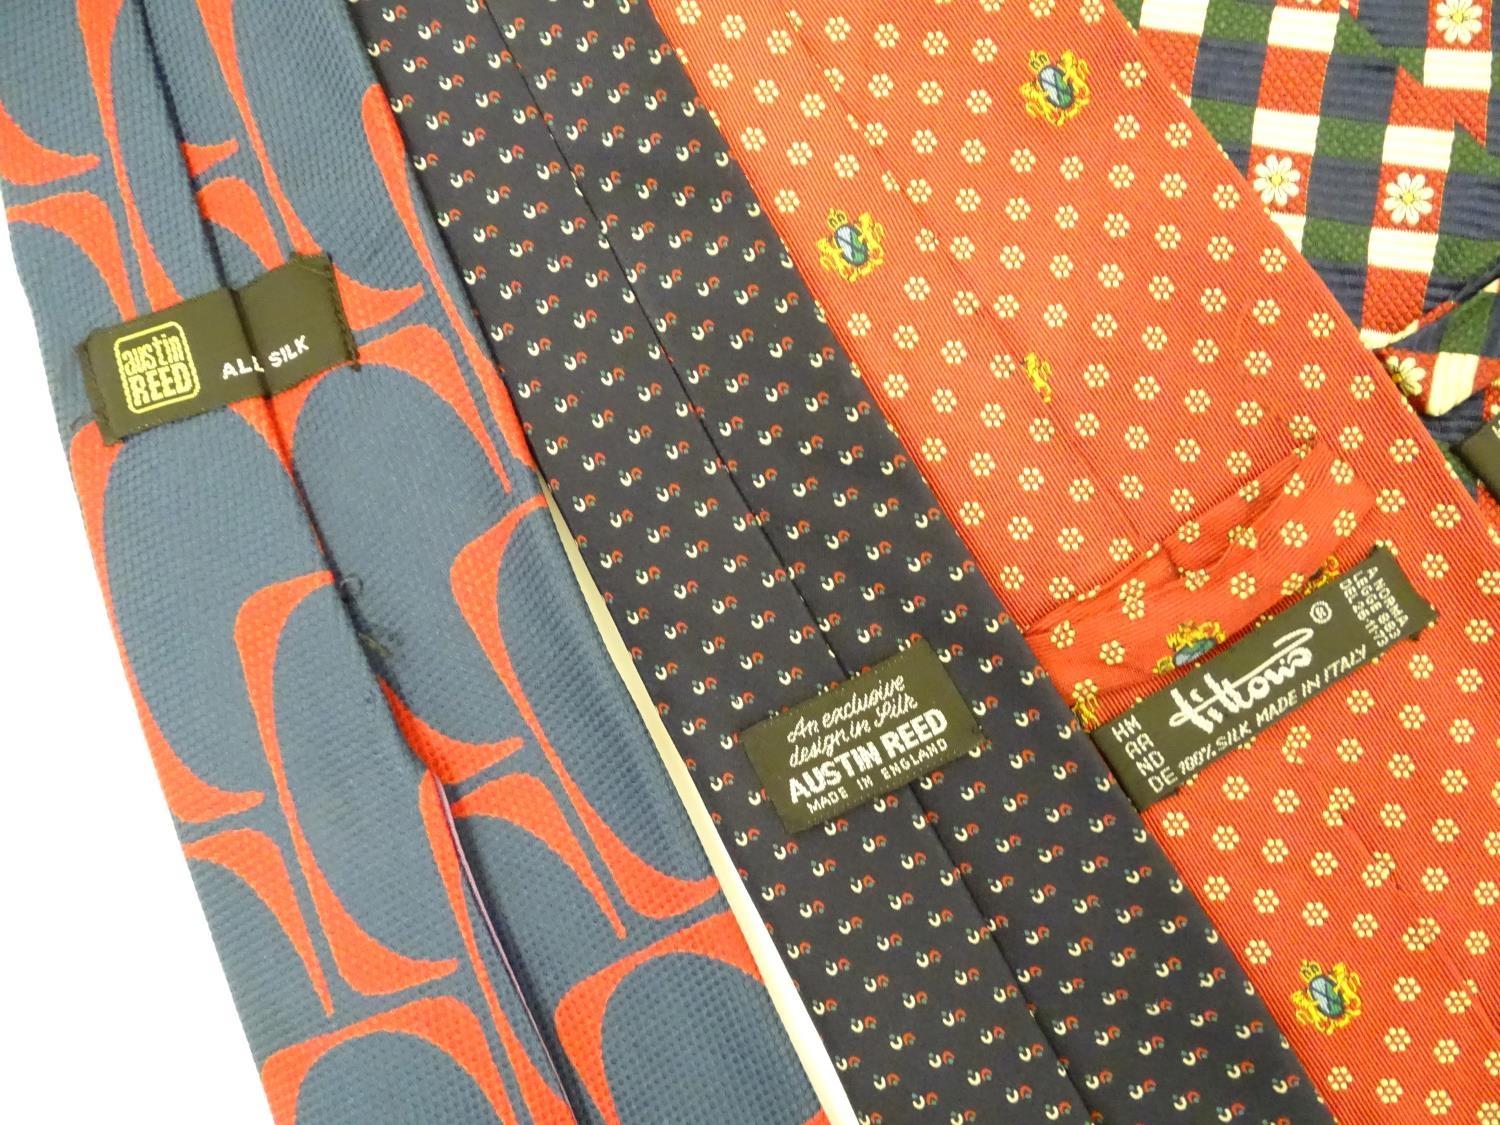 6 silk ties in navy and reds by Austin Reed, Tittorio, Pink and John Harmer (6) Please Note - we - Image 7 of 9